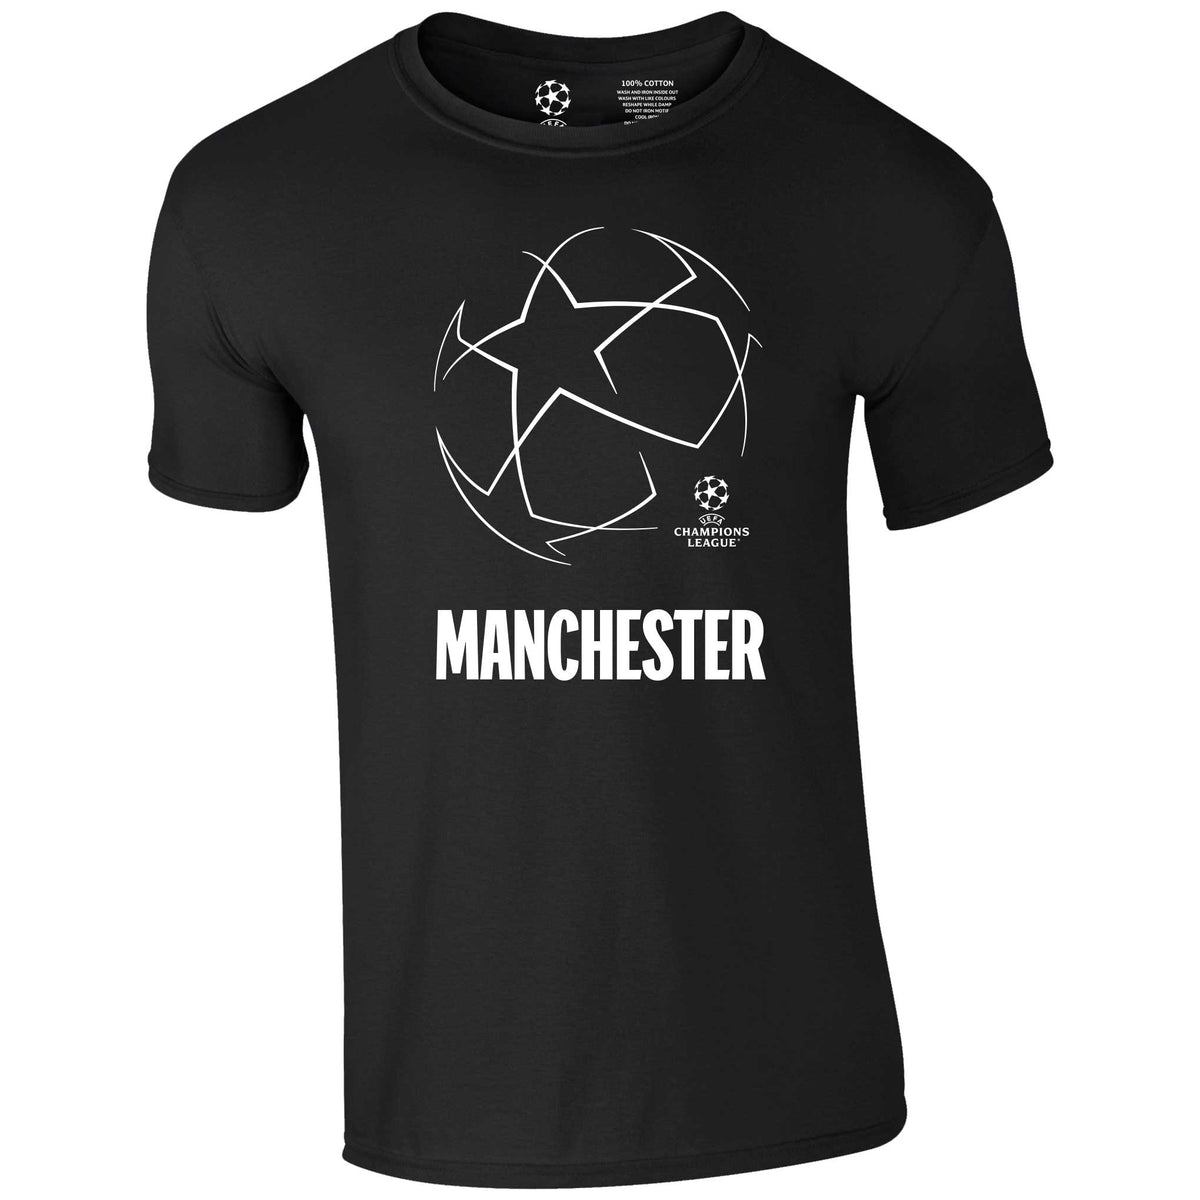 Champions League Starball Manchester City T-Shirt Black